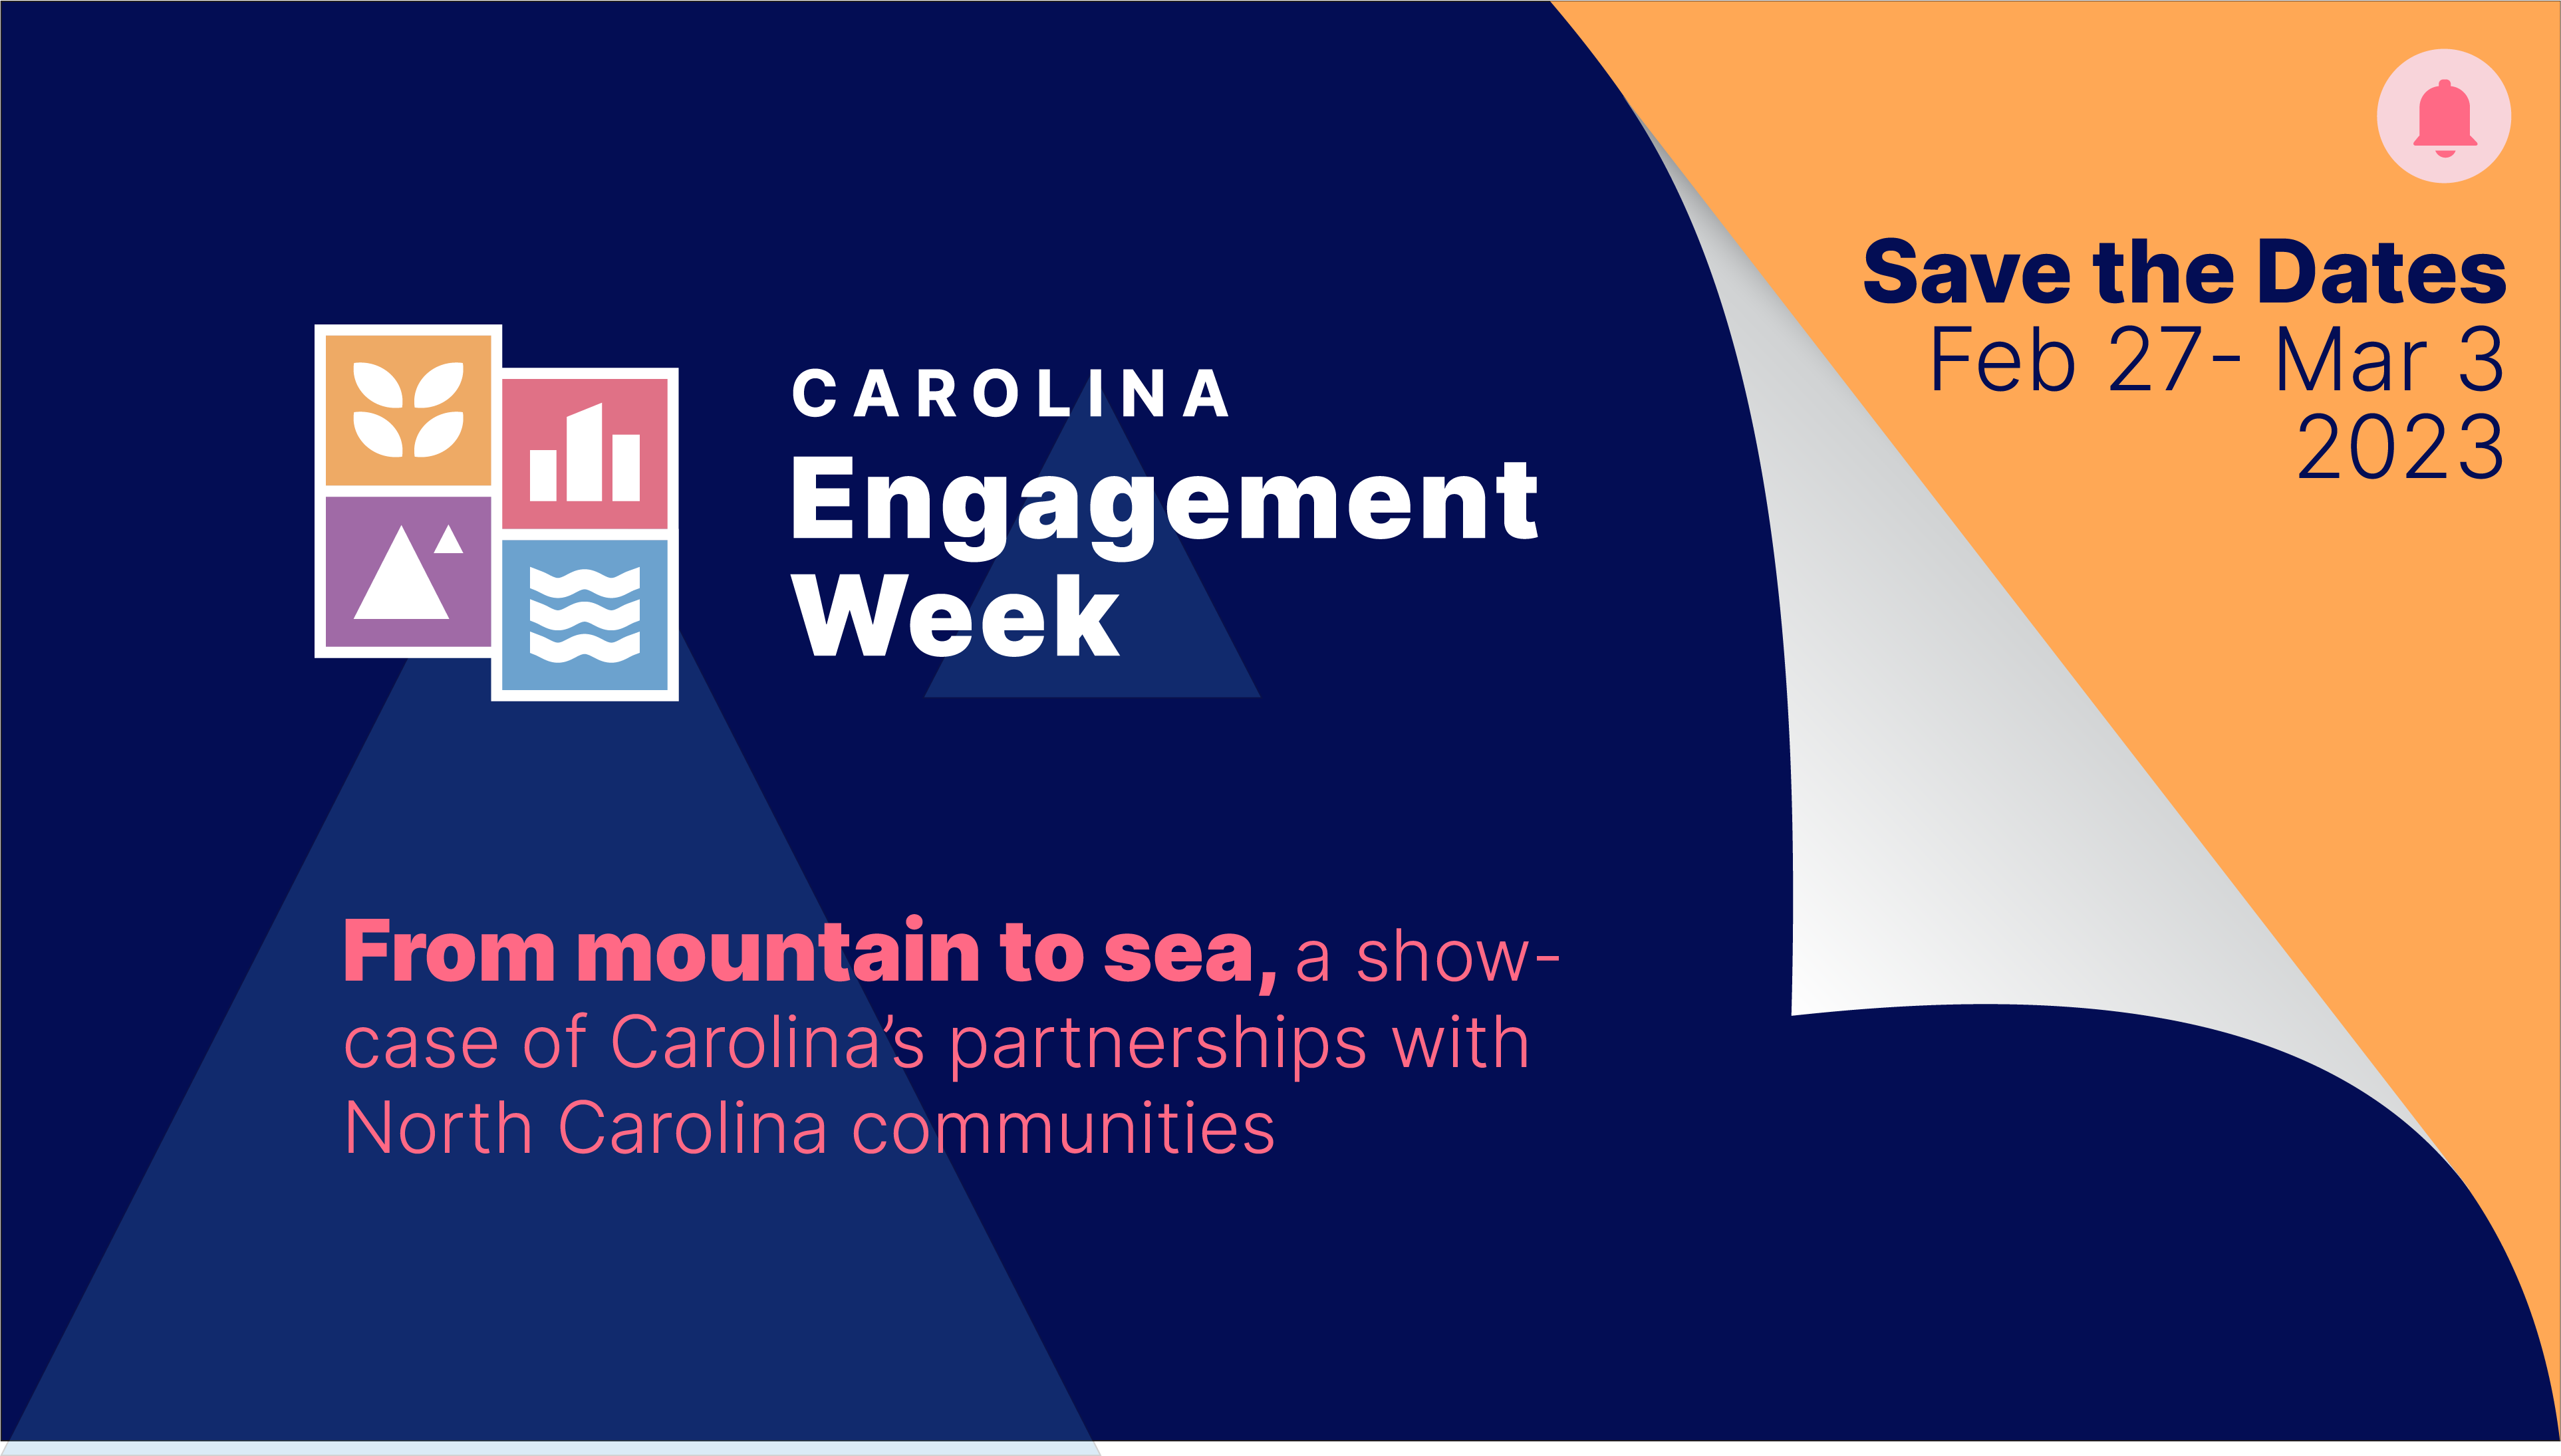 Dark blue background peels away to reveal a yellow background underneath. The dark blue area has the Carolina Engagement Week logo and pink text: "Showcasing Carolina's partnerships with N.C. communities." The yellow background has the text "Save the dates, February 27 - March 3, 2023."